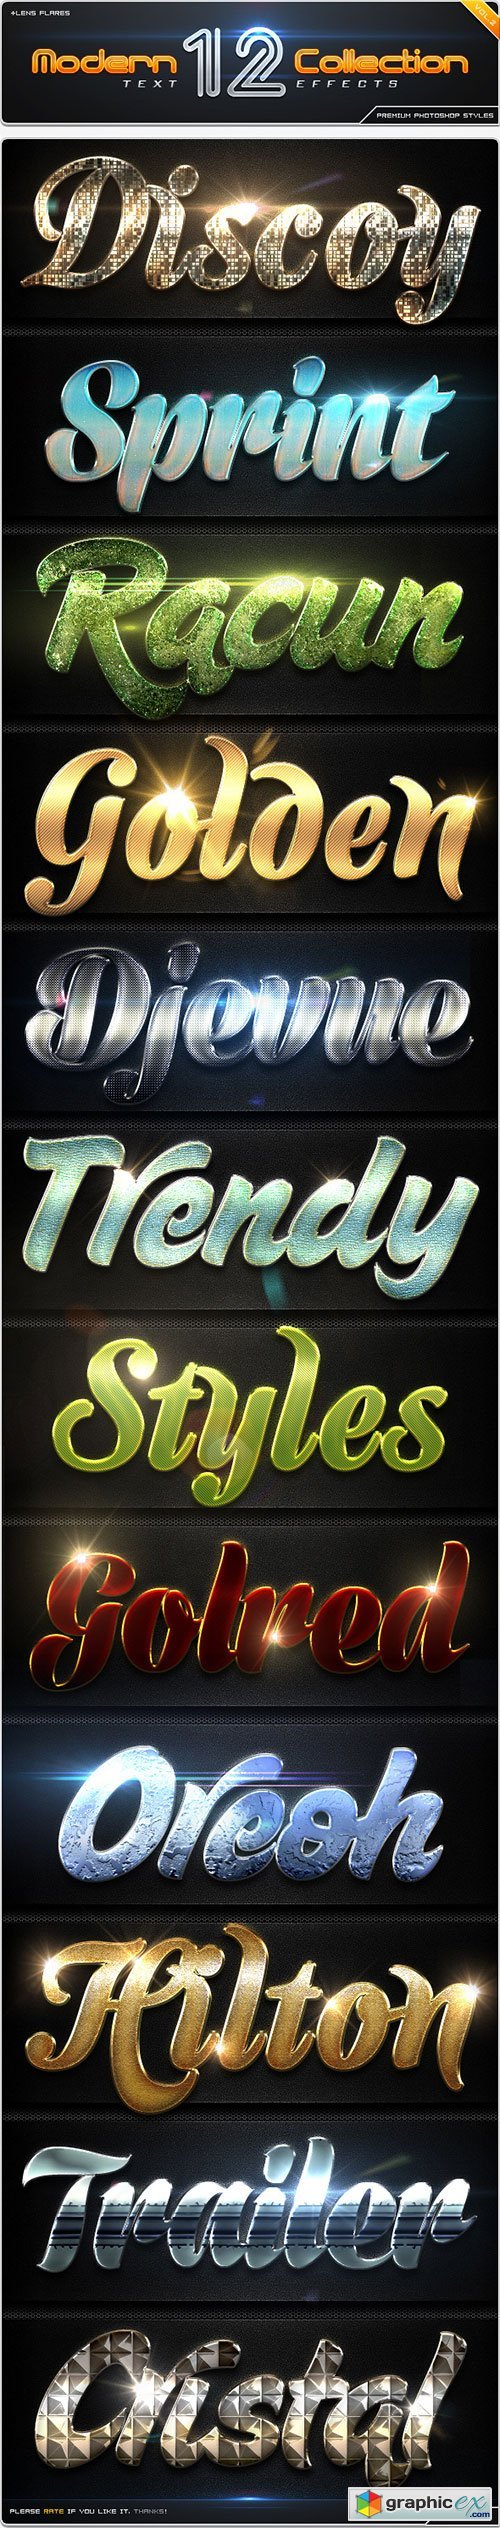 12 Modern Collection Text Effect Styles Vol.2